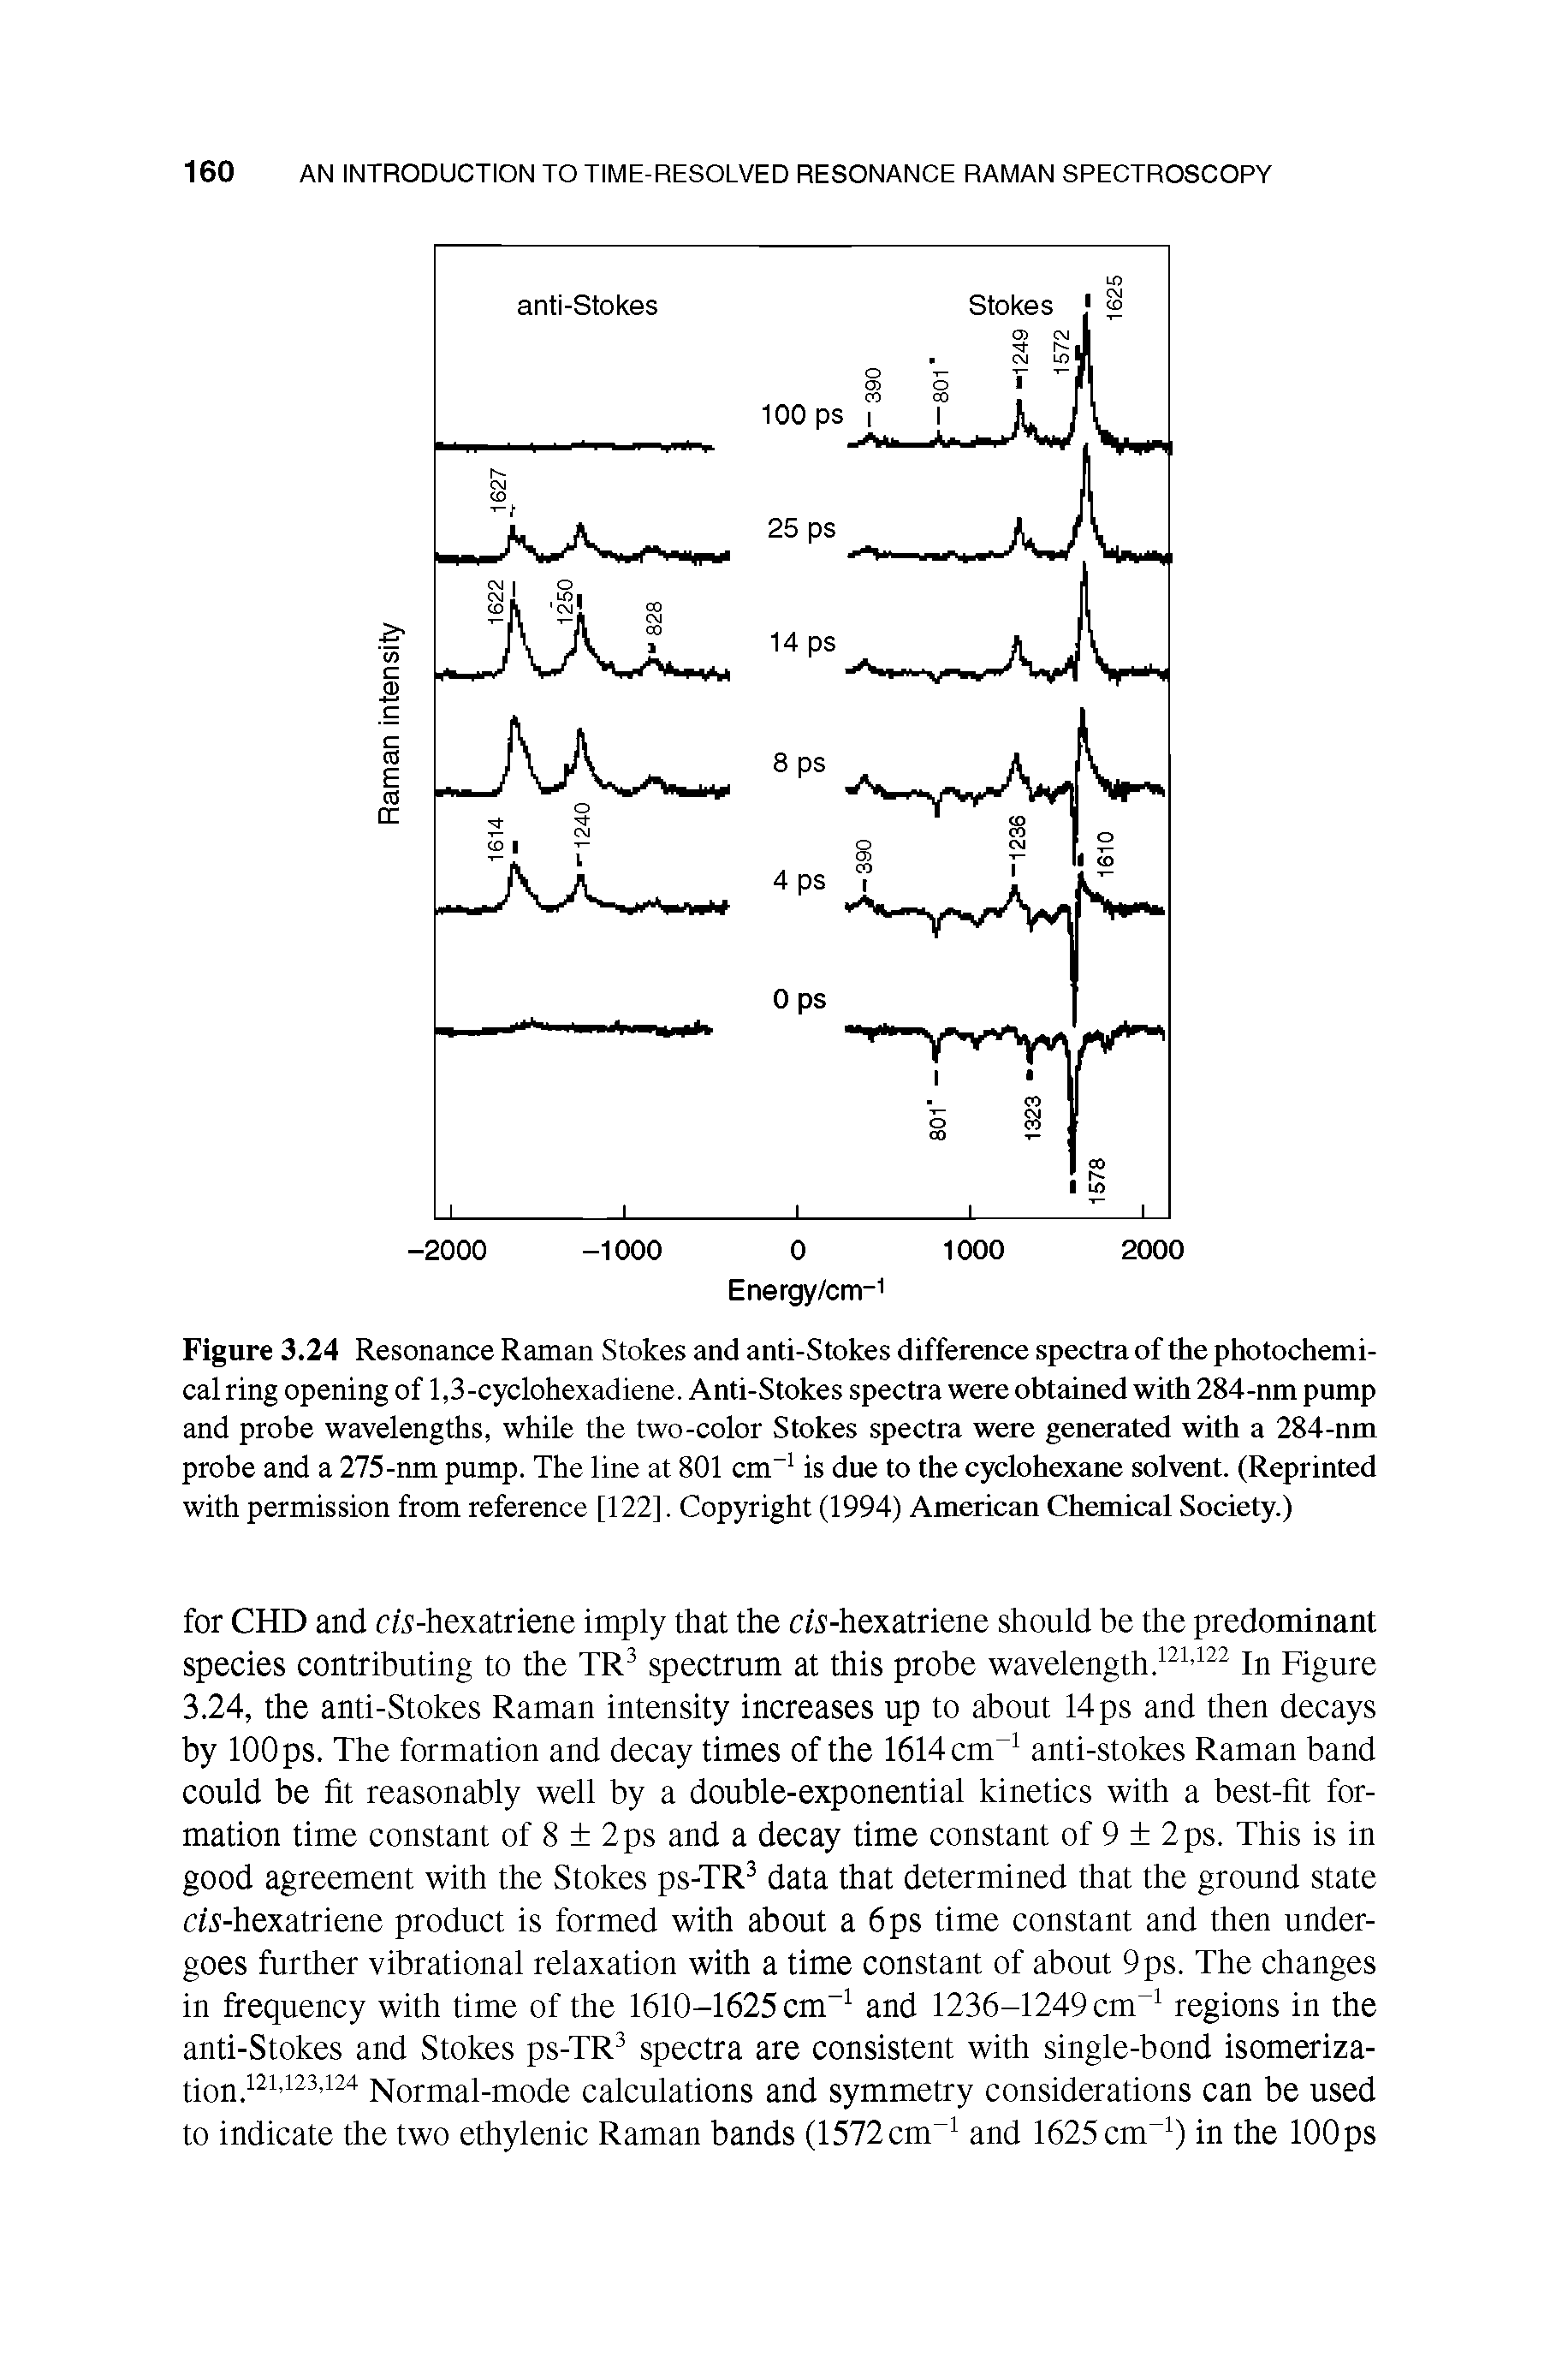 Figure 3.24 Resonance Raman Stokes and anti-Stokes difference spectra of the photochemical ring opening of 1,3-cyclohexadiene. Anti-Stokes spectra were obtained with 284-nm pump and probe wavelengths, while the two-color Stokes spectra were generated with a 284-nm probe and a 275-nm pump. The line at 801 cm is due to the cyclohexane solvent. (Reprinted with permission from reference [122]. Copyright (1994) American Chemical Society.)...